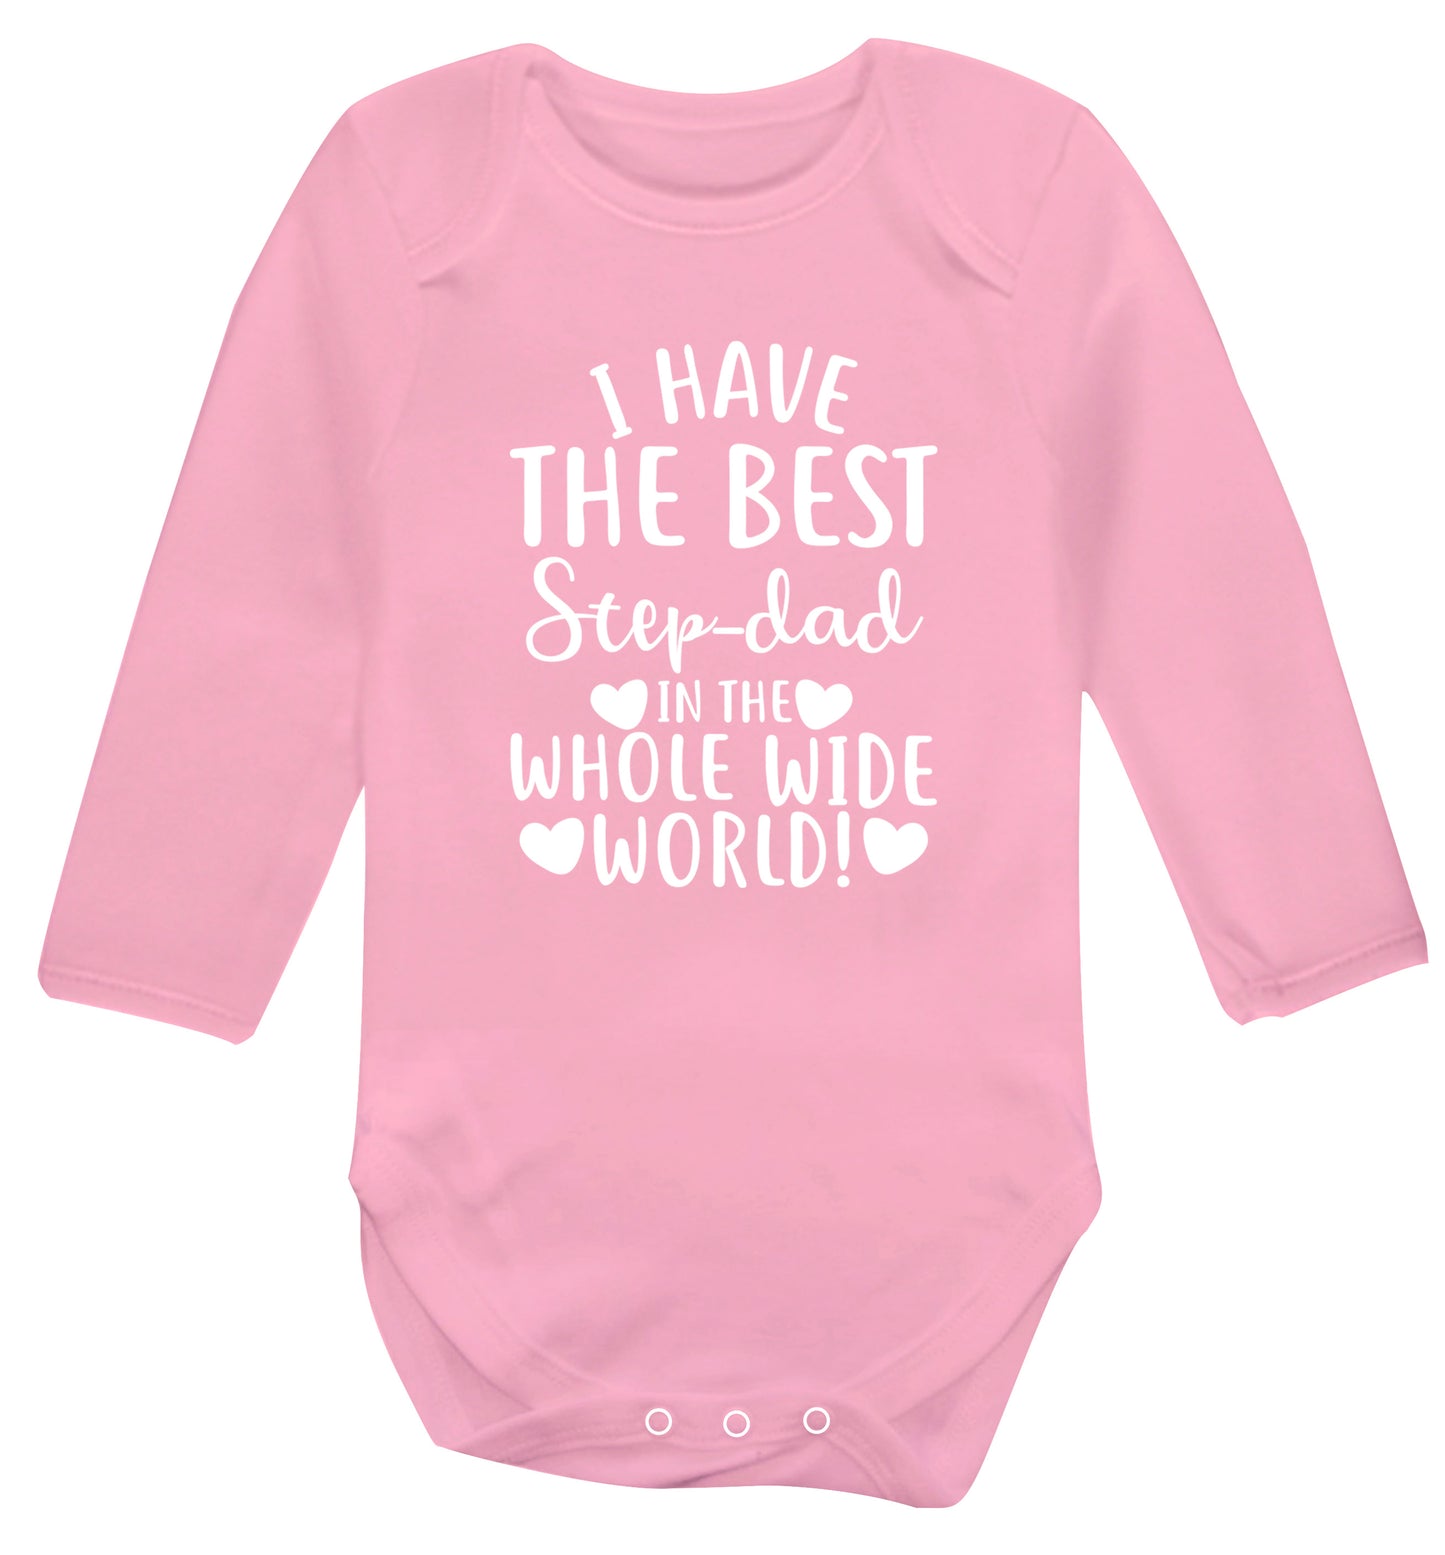 I have the best step-dad in the whole wide world! Baby Vest long sleeved pale pink 6-12 months